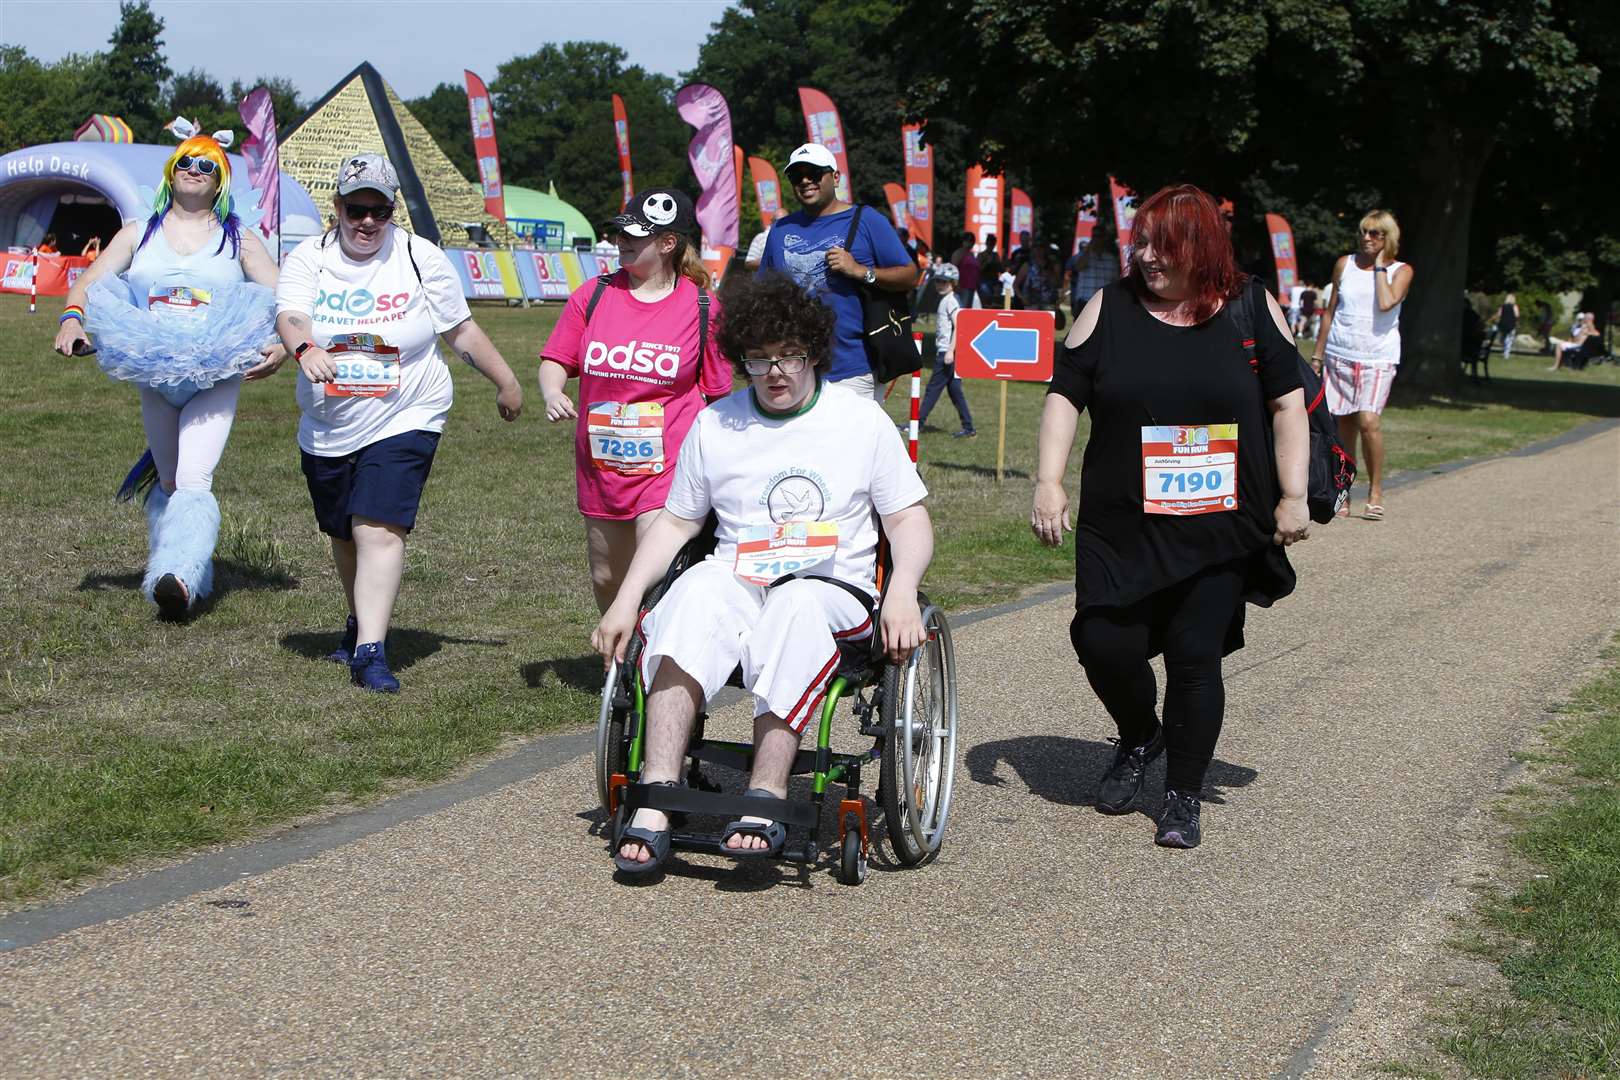 Ambitious Owen takes part in the Mote Park fun run to raise money for Freedom For Wheels